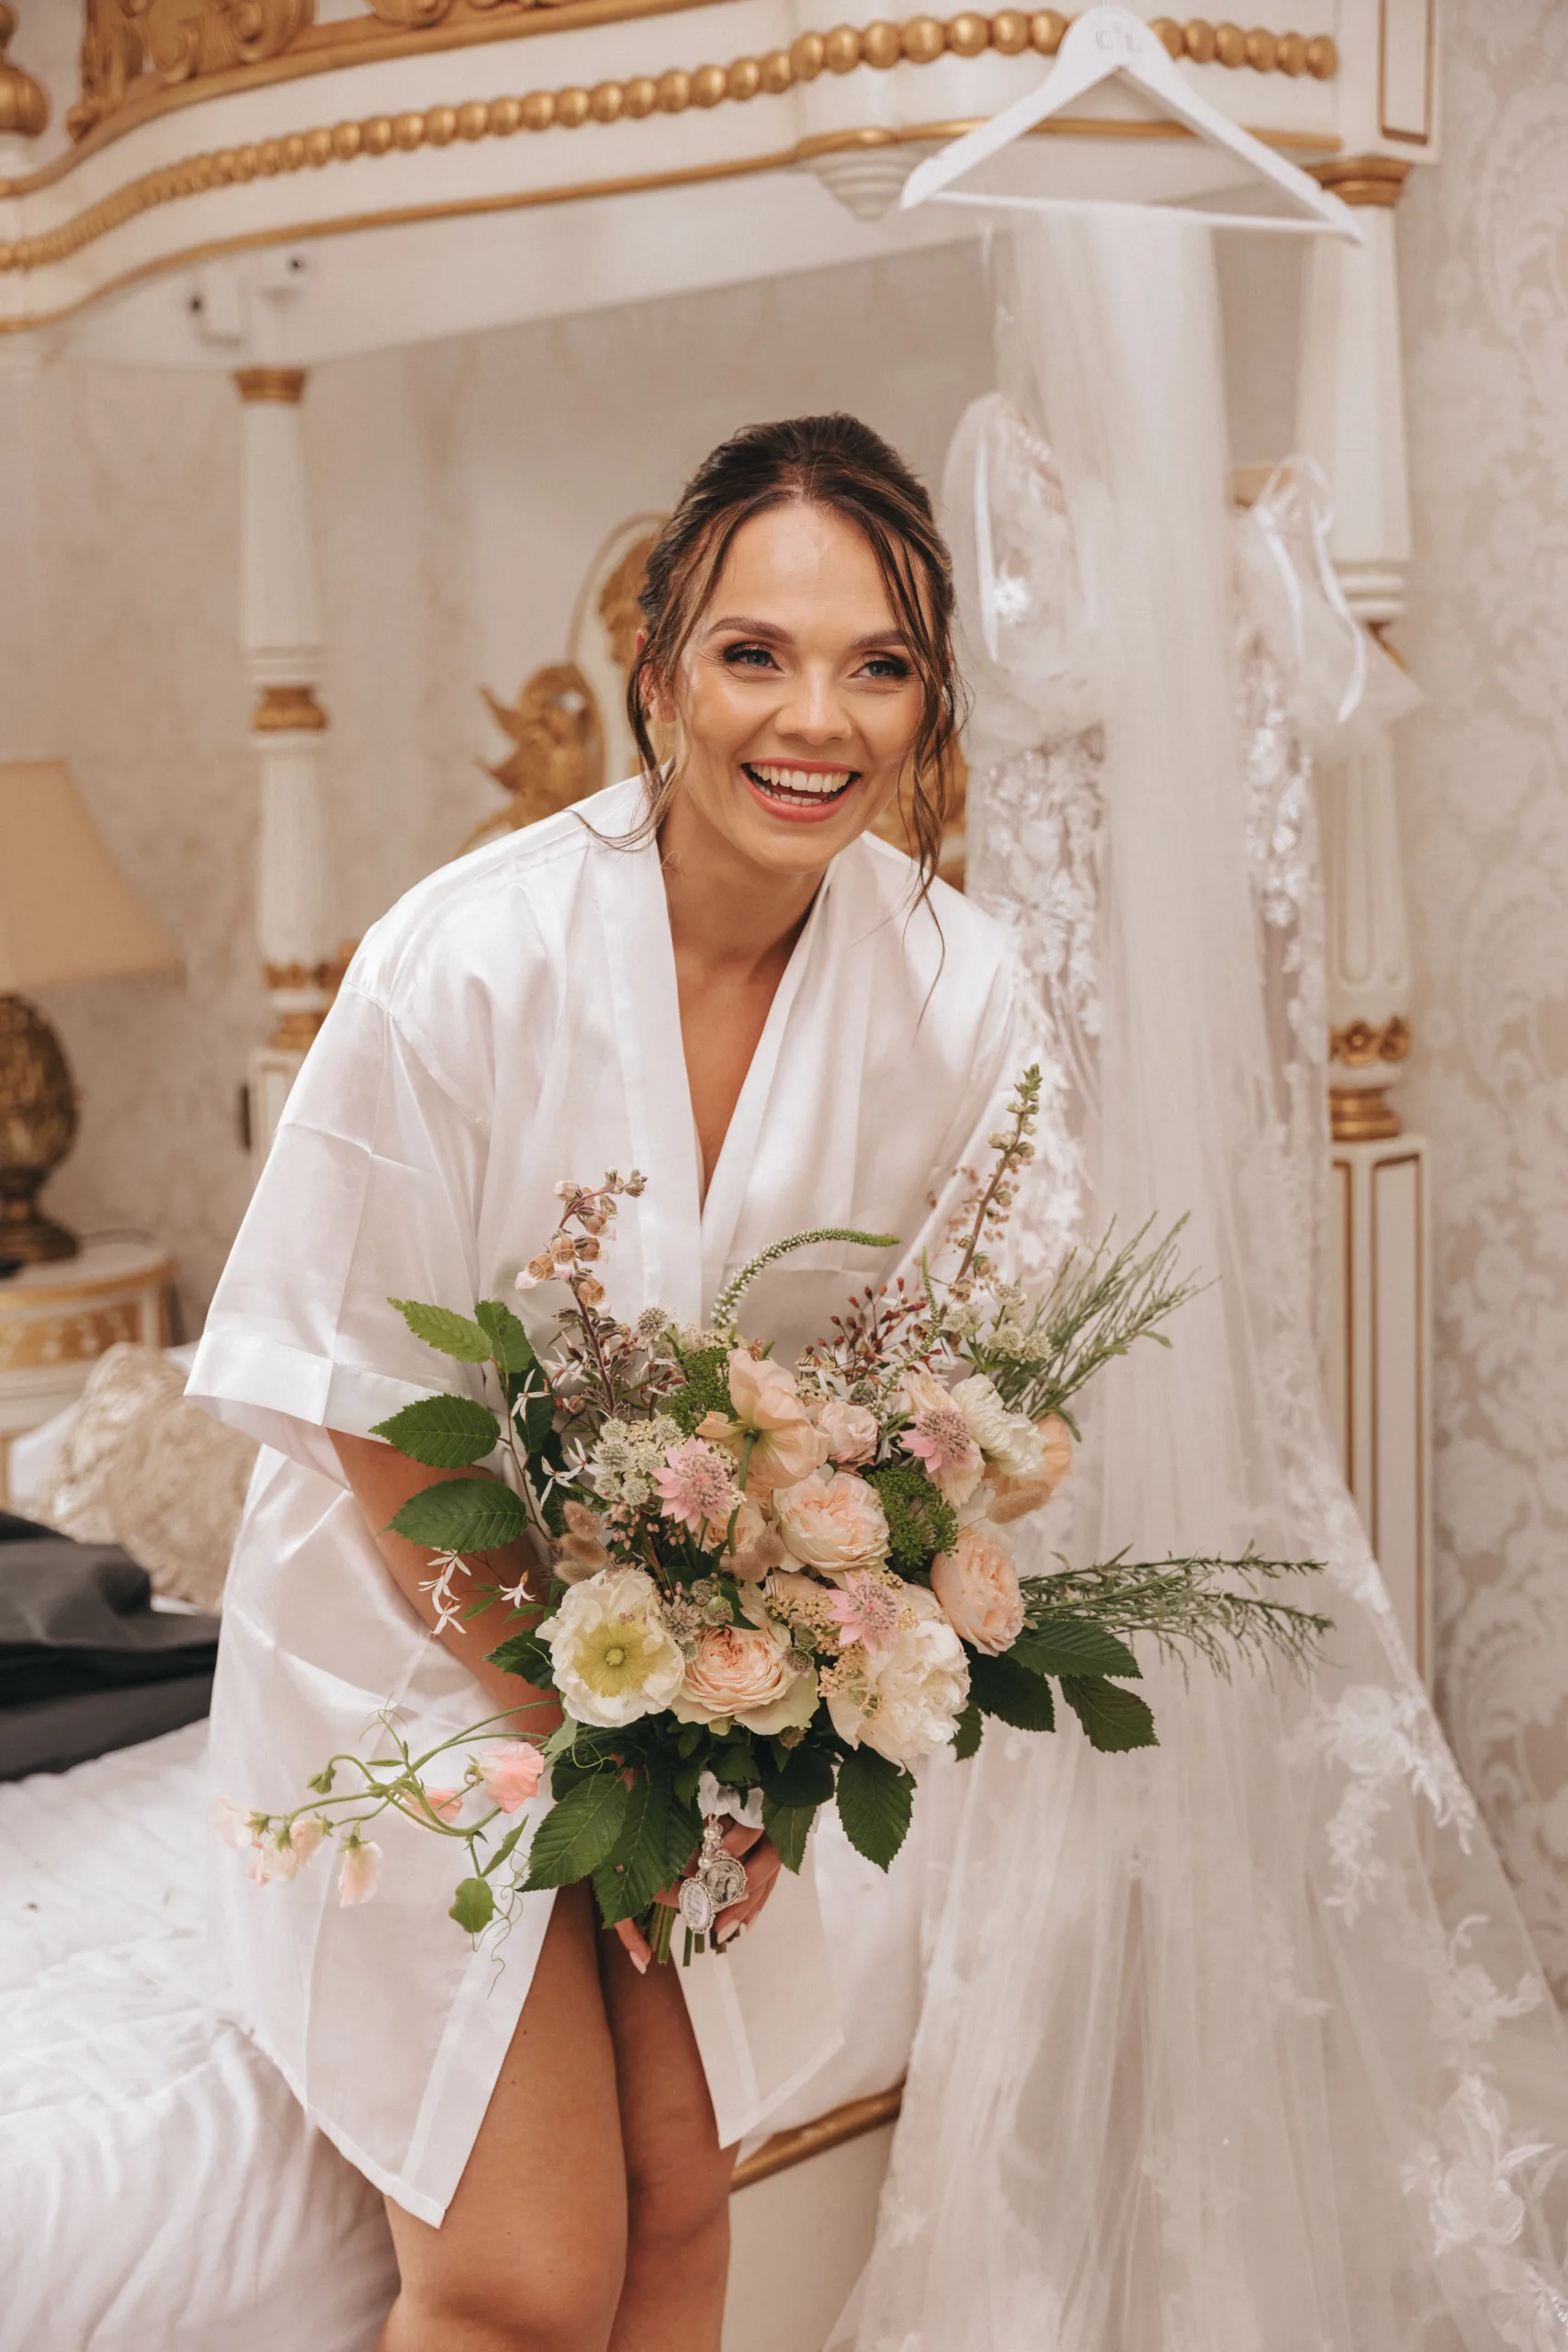 A bride in a white robe holding a bouquet in front of her bed captured by a photographer.